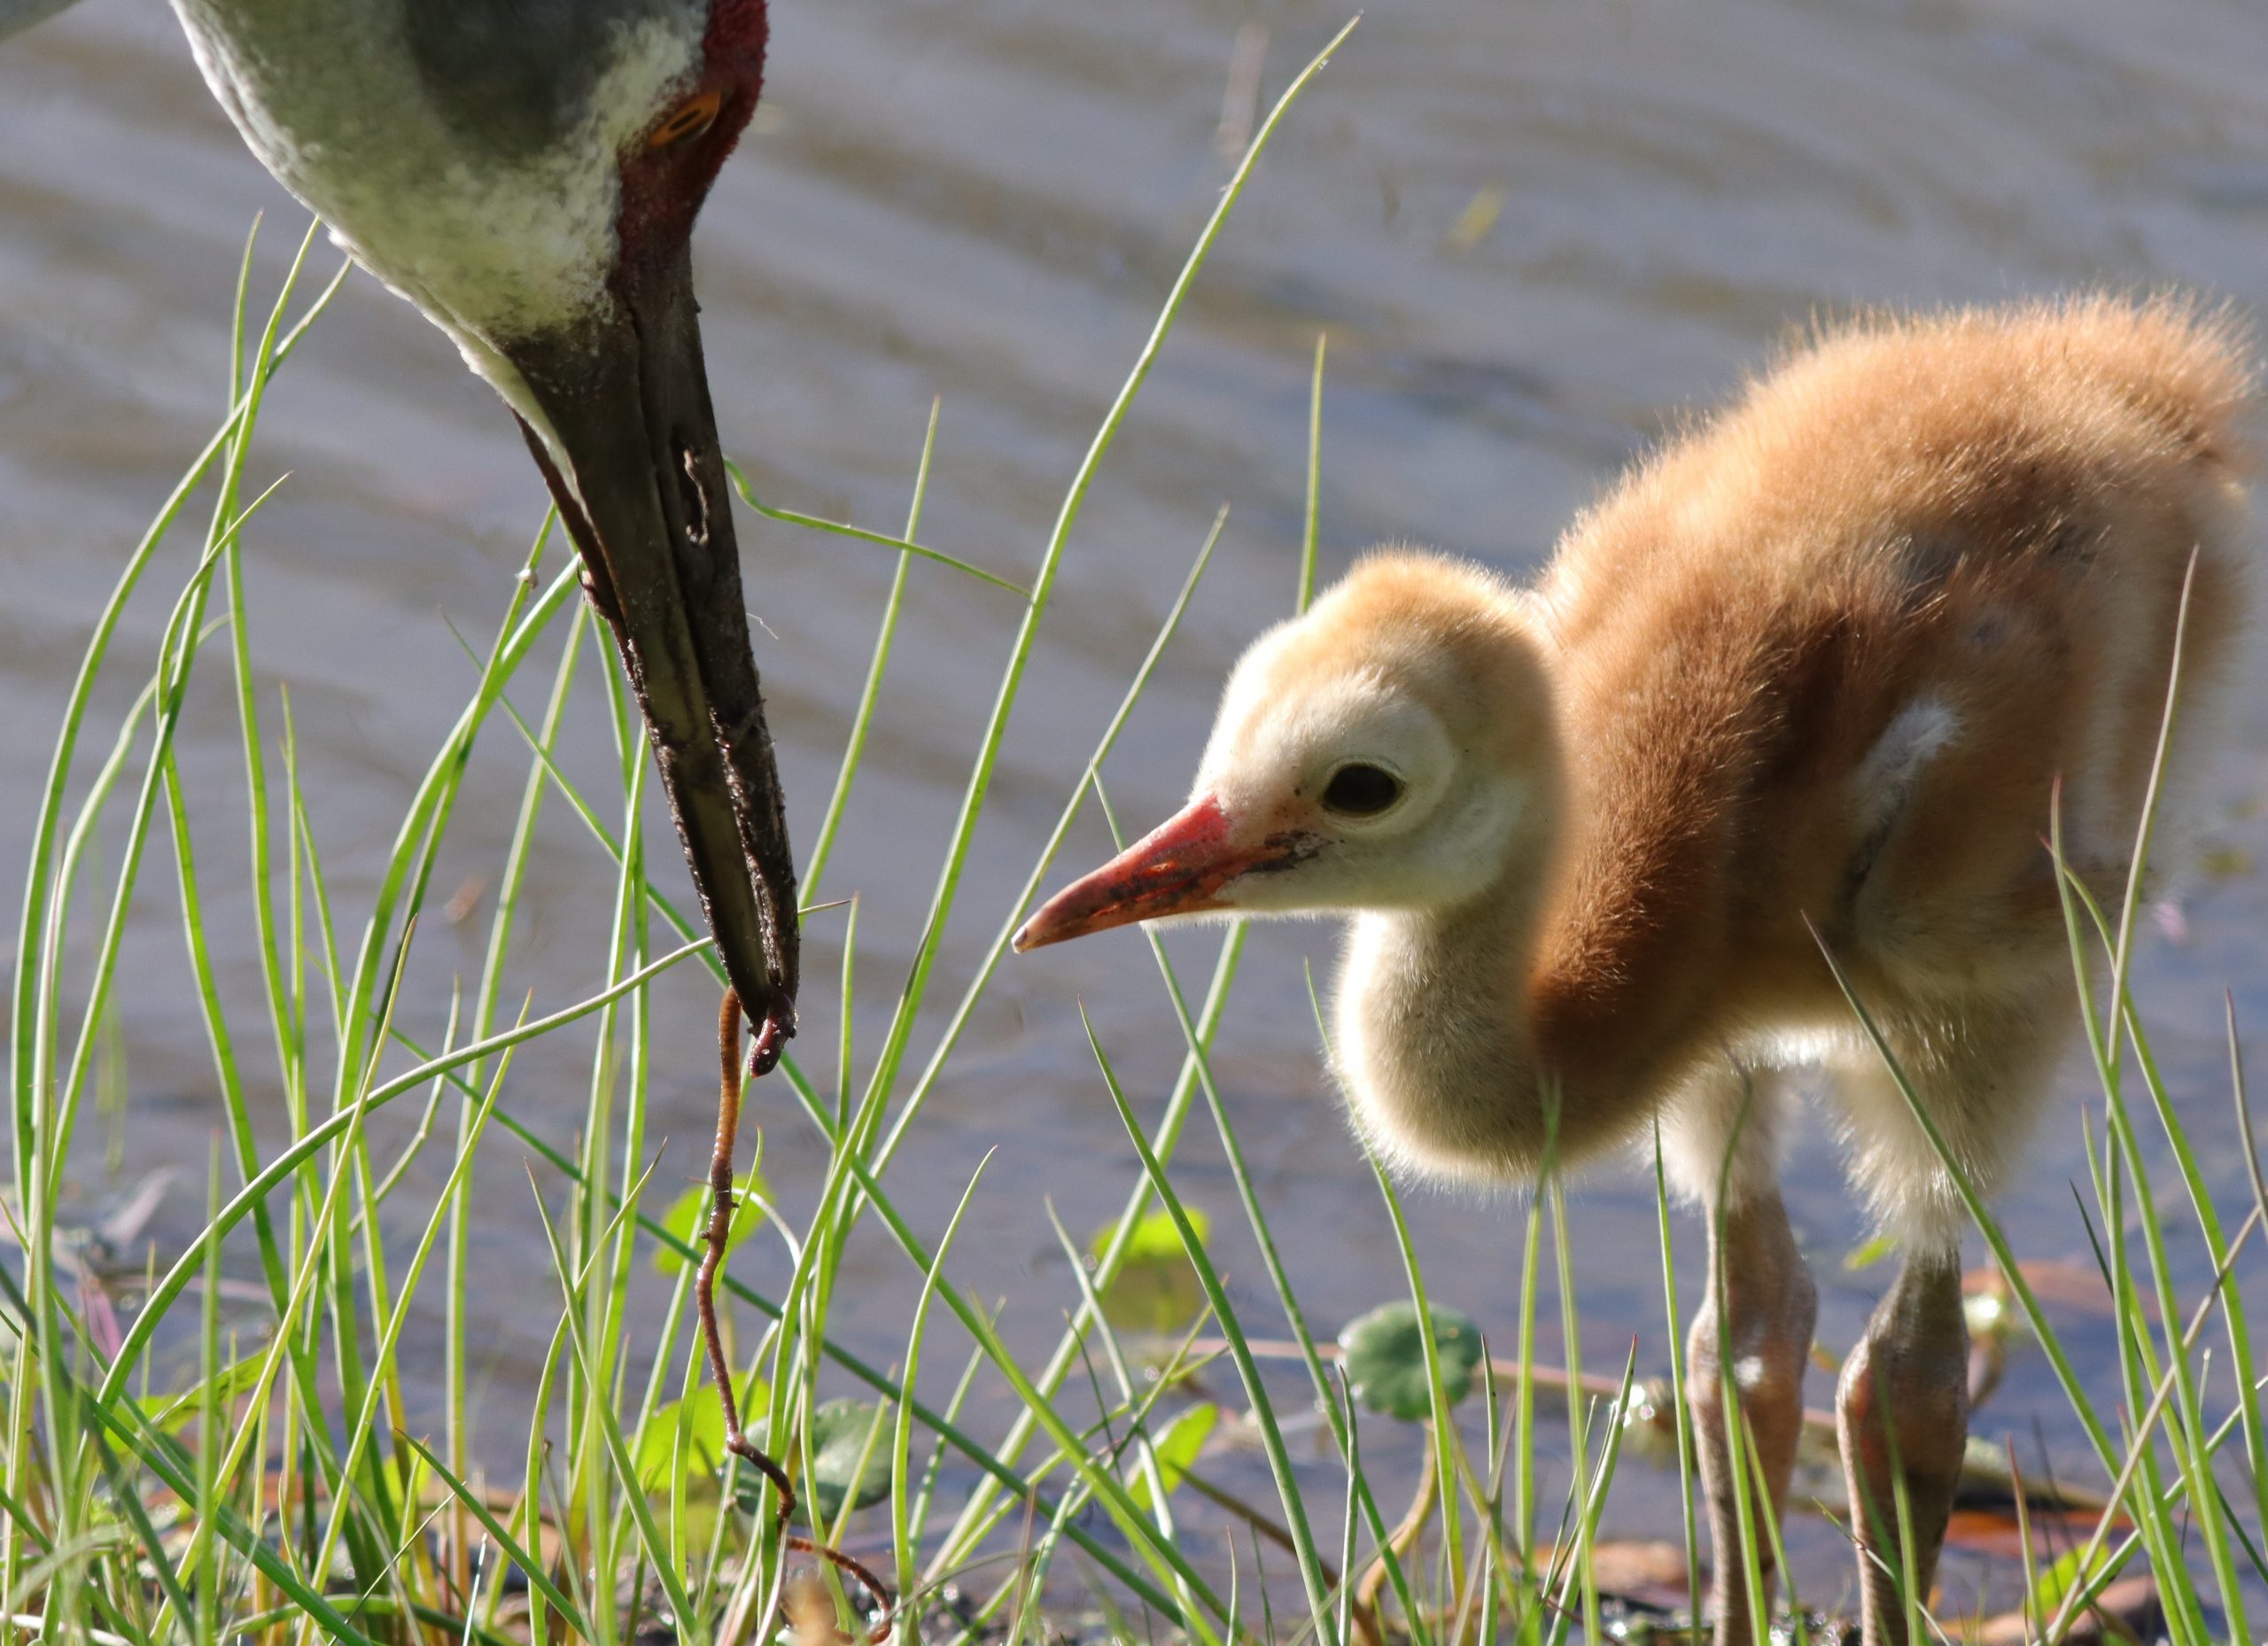 Sandhill Crane Gives Worm To Its Young